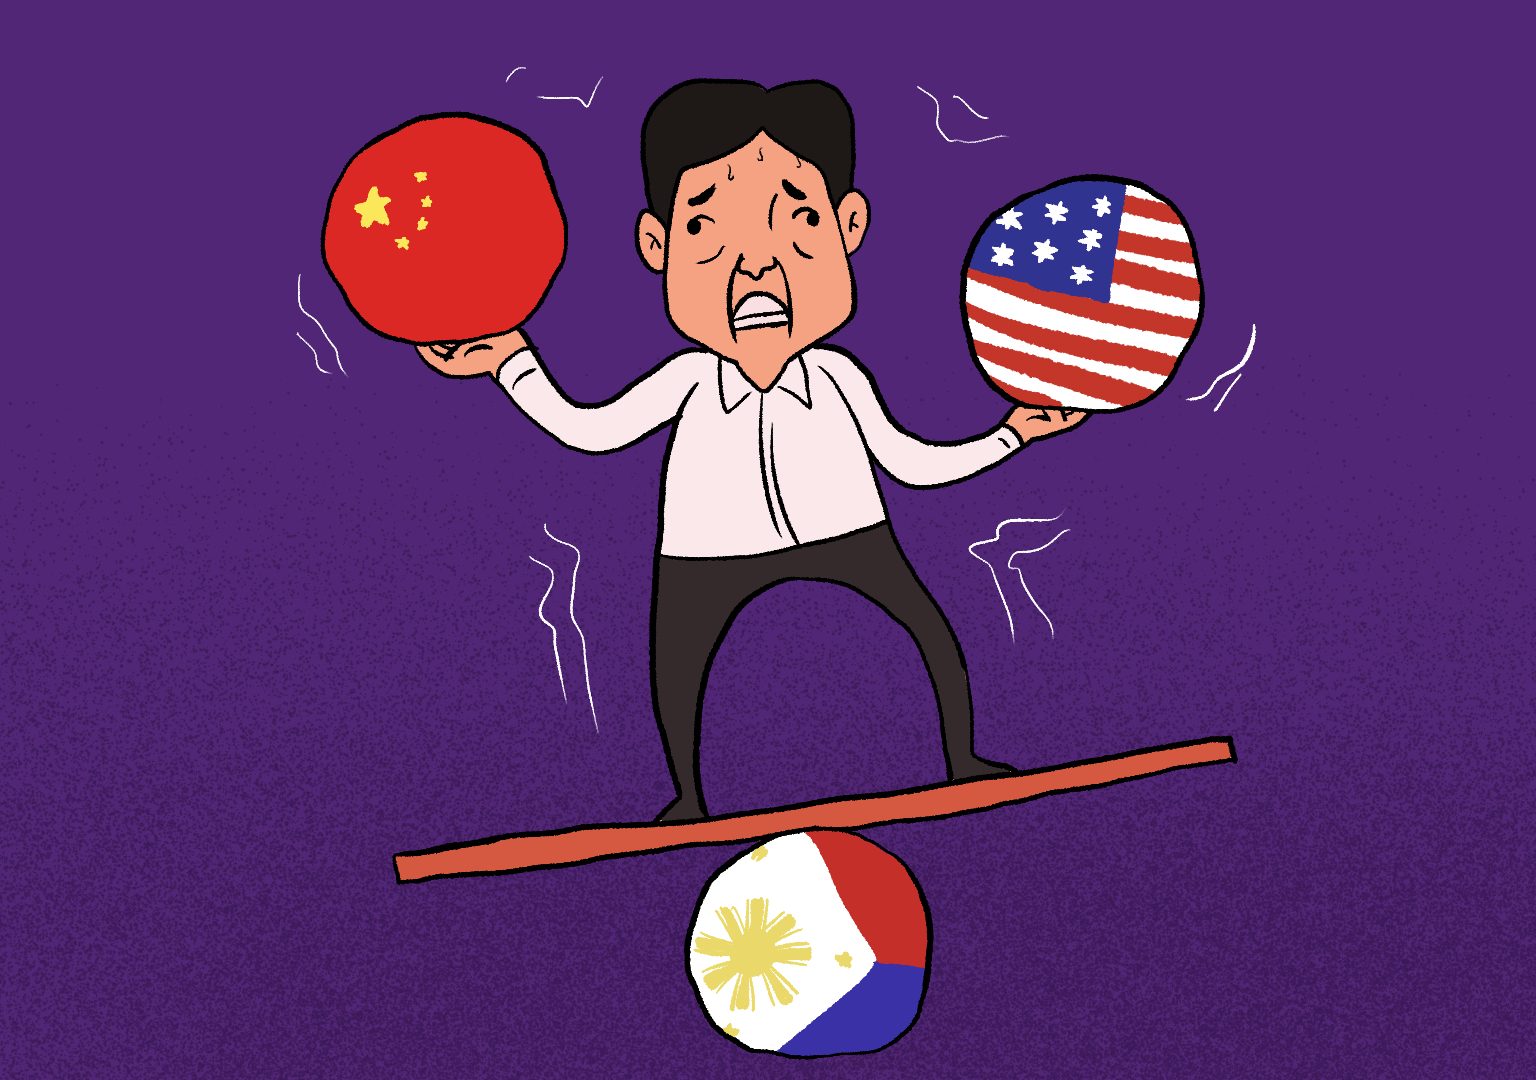 [OPINION] Flexible foreign policy: Balancing PH relations with US, China under Marcos Jr. presidency